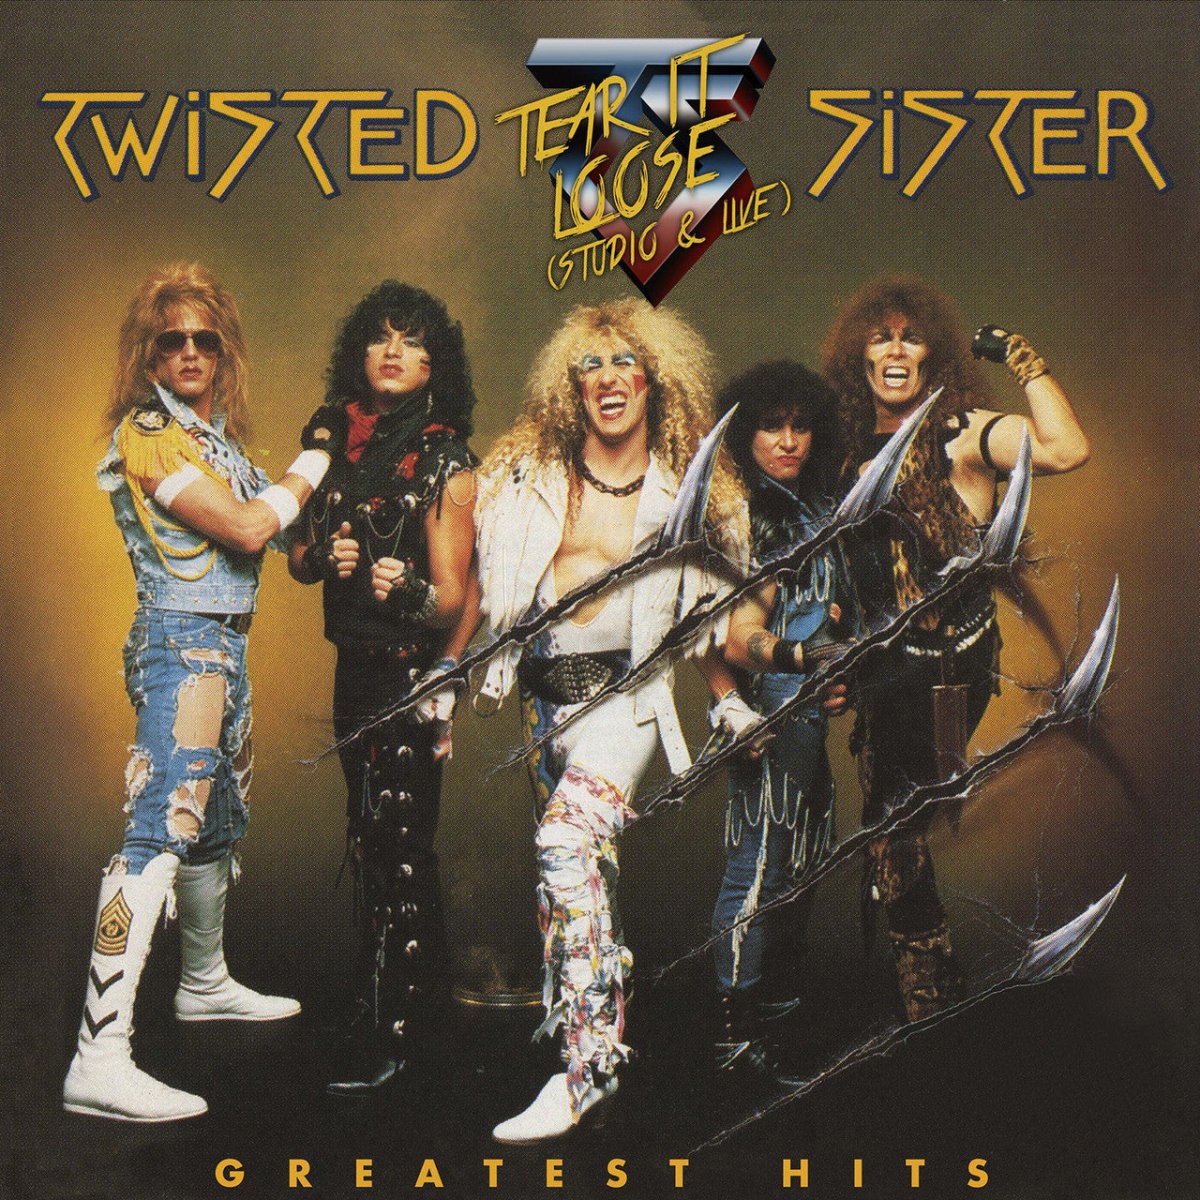 Twisted Sister - Greatest Hits Vinyl